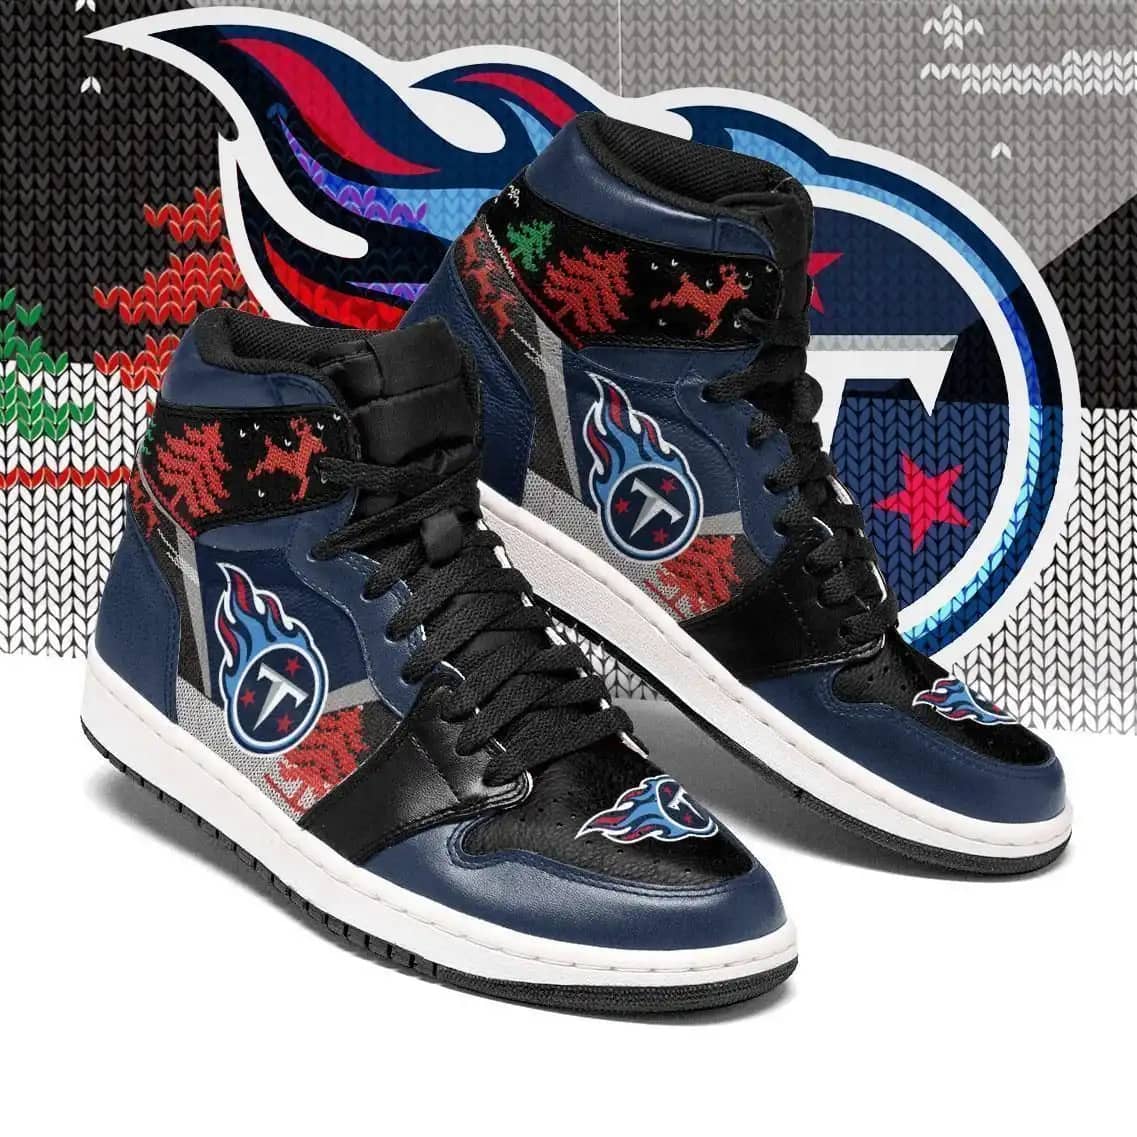 Christmas Tennessee Titans Nfl Sneaker Team Perfect Gift For Fans Air Jordan Shoes